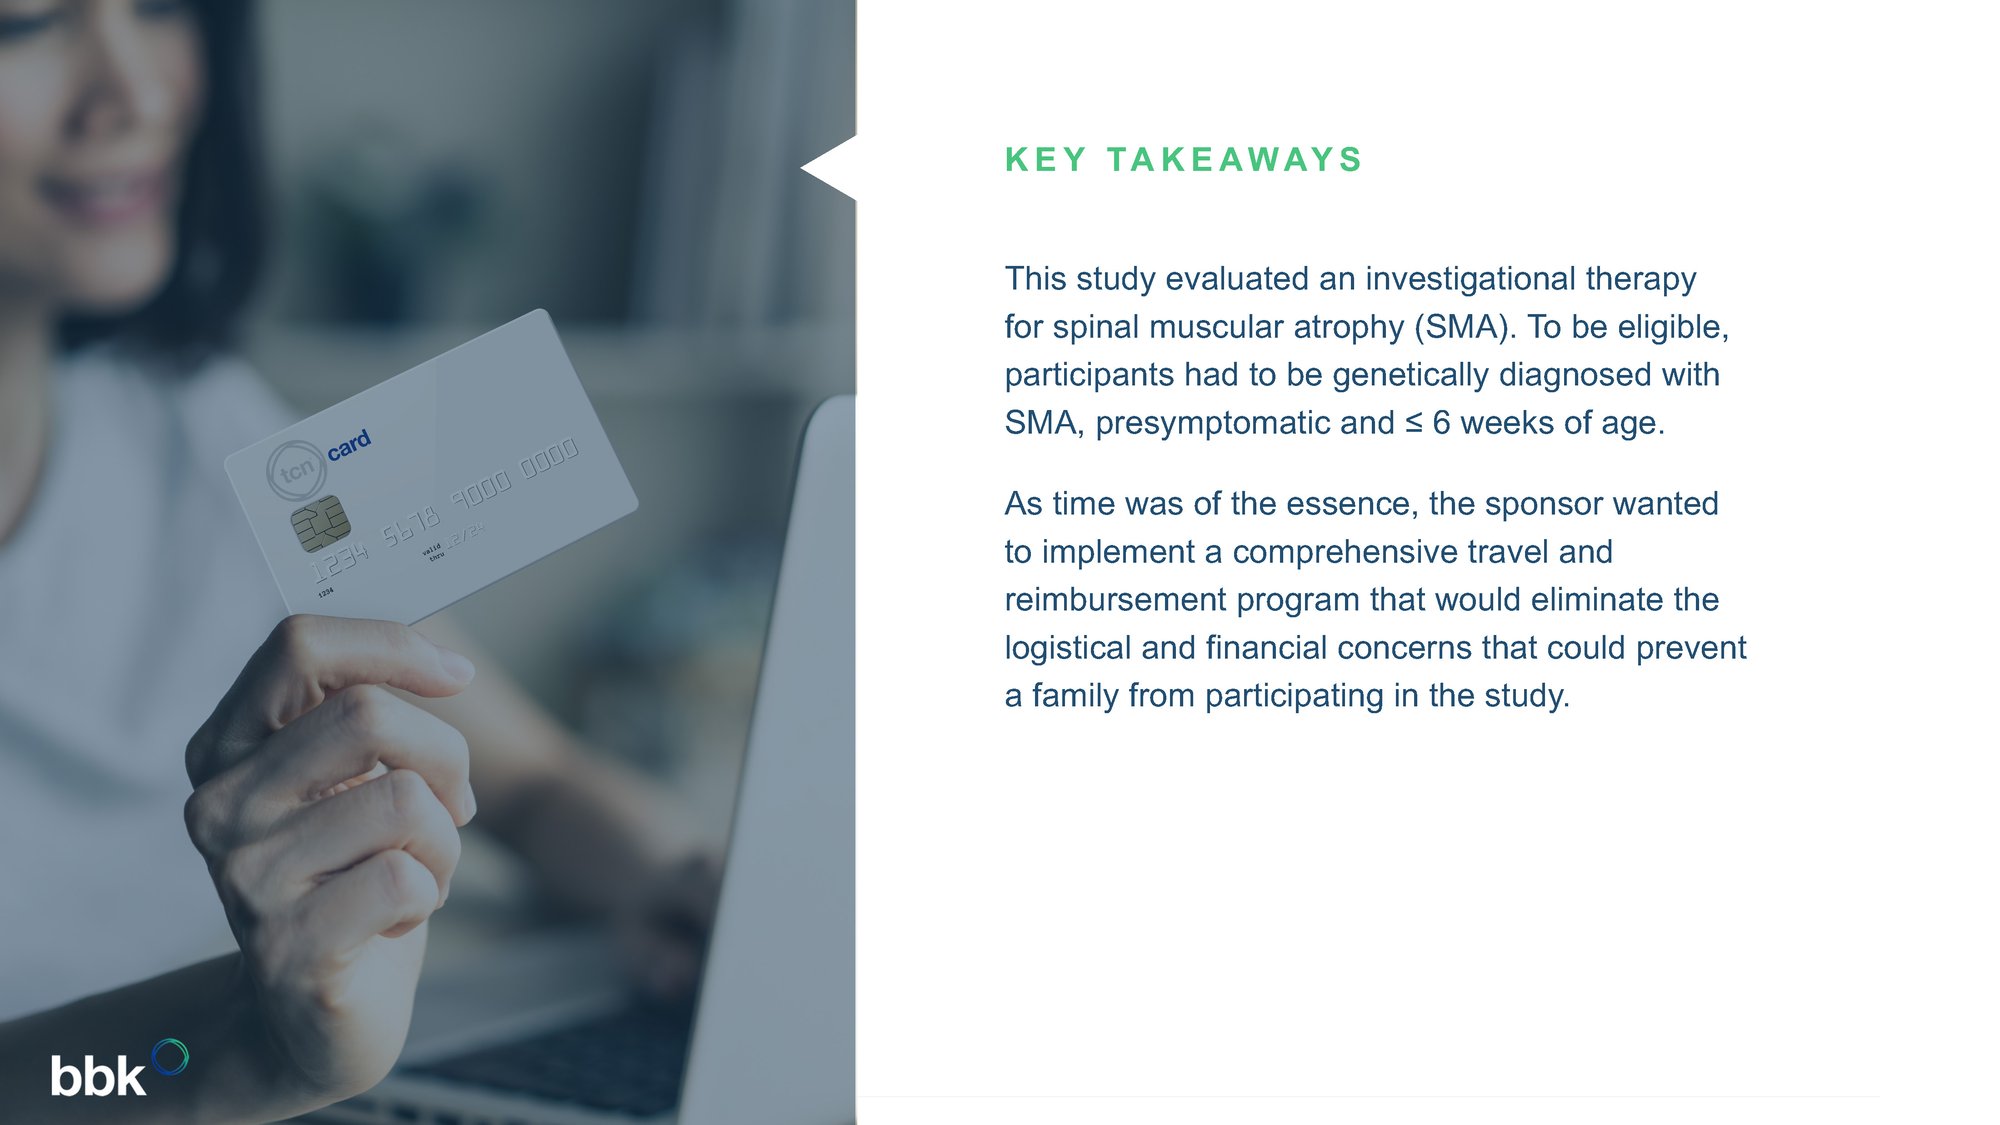 Spinal Muscular Atrophy Patient Recruitment Case Study: Key Takeaways